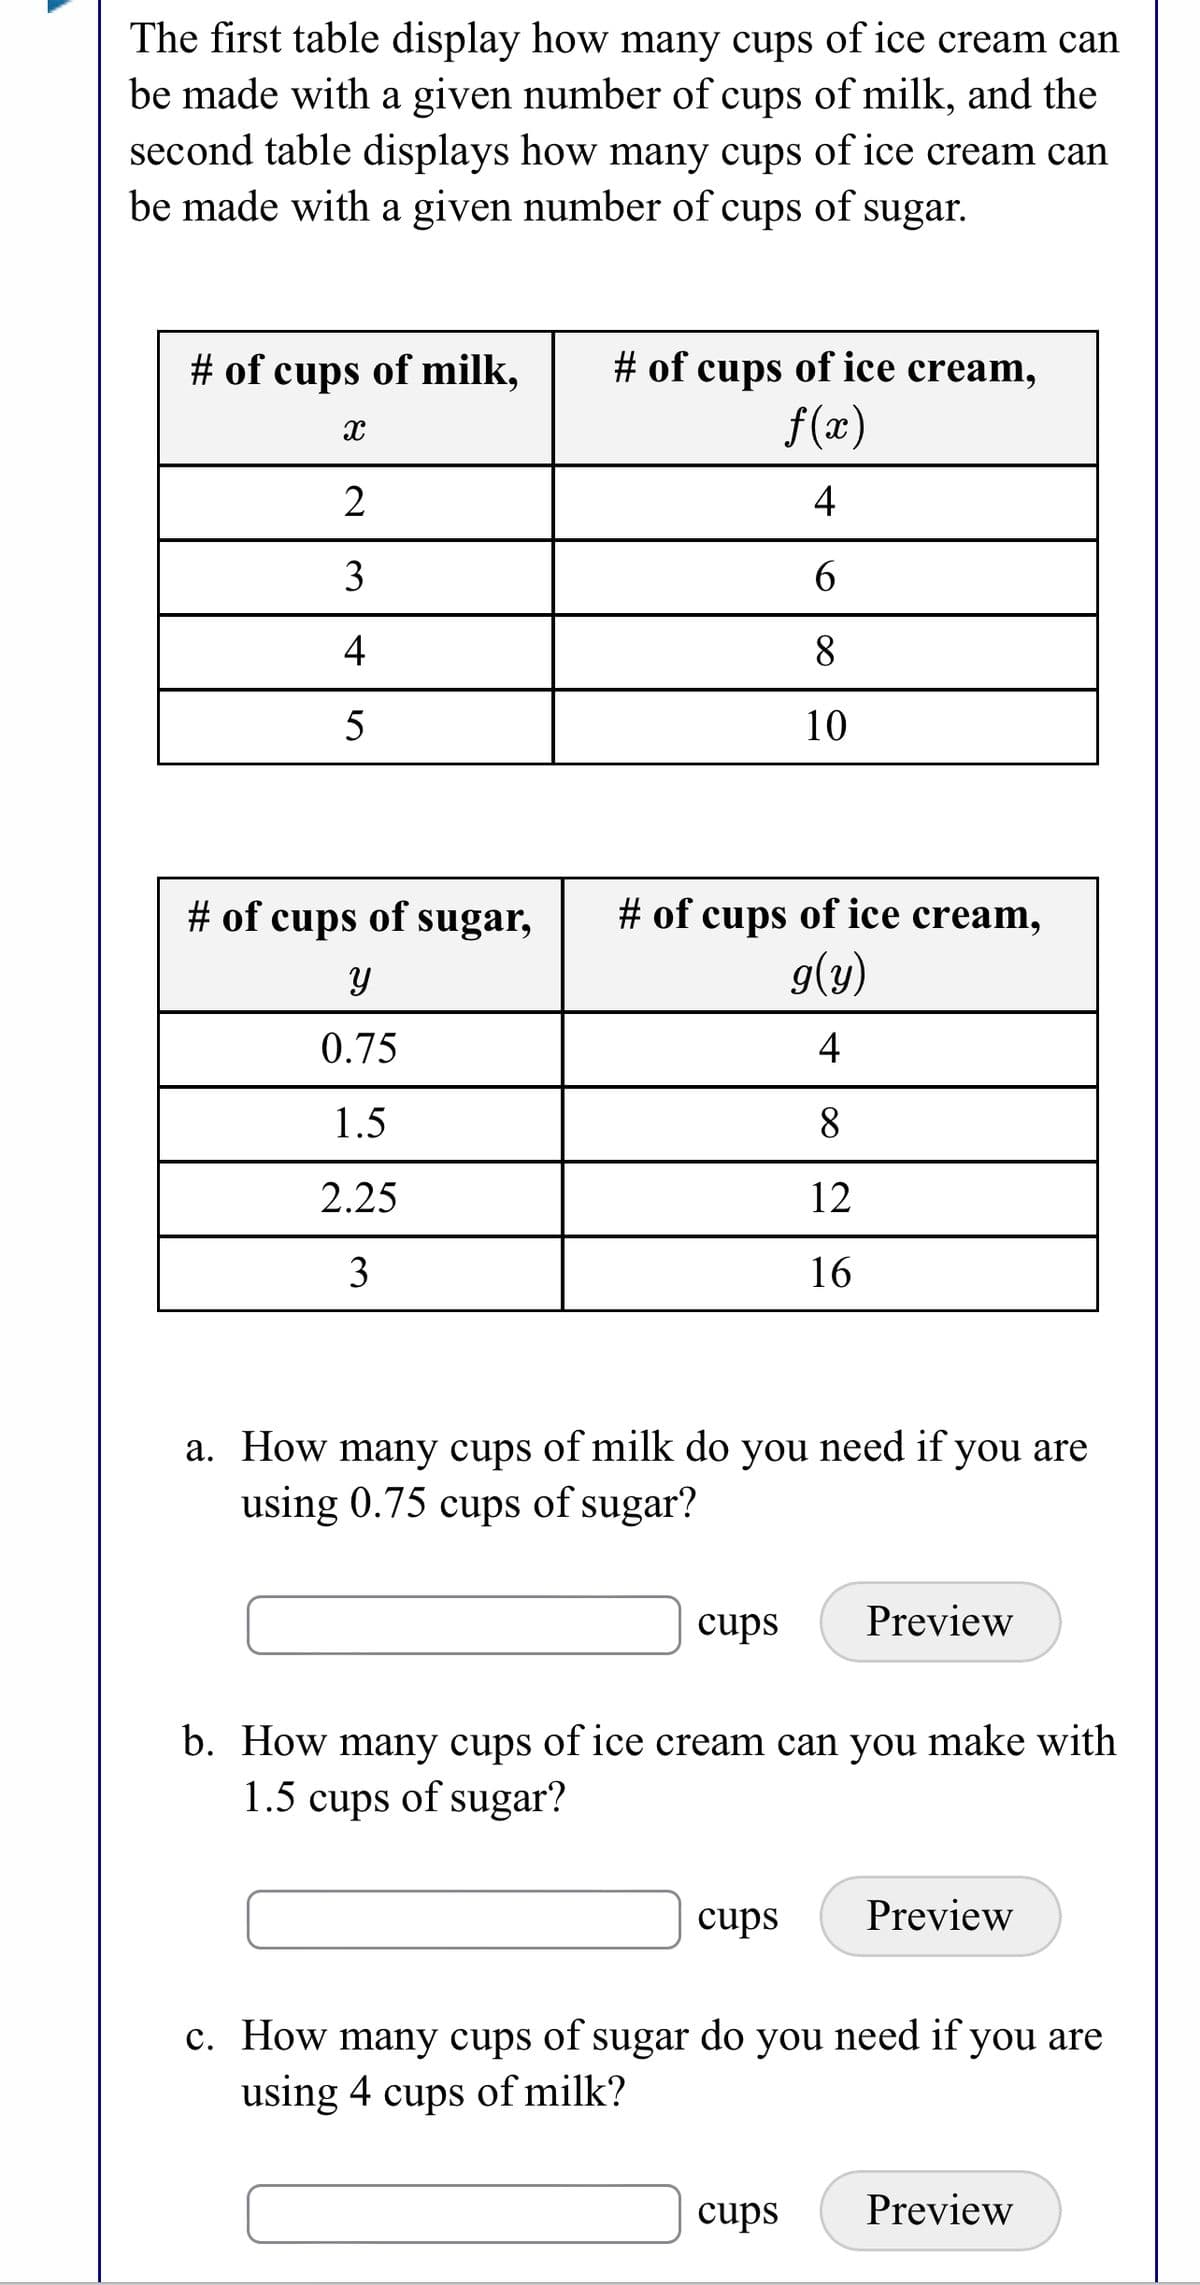 The first table display how many cups of ice cream can
be made with a given number of cups of milk, and the
second table displays how many cups of ice cream can
be made with a given number of cups of sugar.
# of cups of ice cream,
f(x)
# of cups of milk,
2
4
6.
4
8.
5
10
# of cups of sugar,
# of cups of ice cream,
g(y)
0.75
4
1.5
8.
2.25
12
3
16
a. How many cups of milk do you need if you are
using 0.75 cups of sugar?
cups
Preview
b. How many cups of ice cream can you make with
1.5
cups
of sugar?
cups
Preview
c. How many cups of sugar do you need if you are
using 4 cups of milk?
cups
Preview
3.
